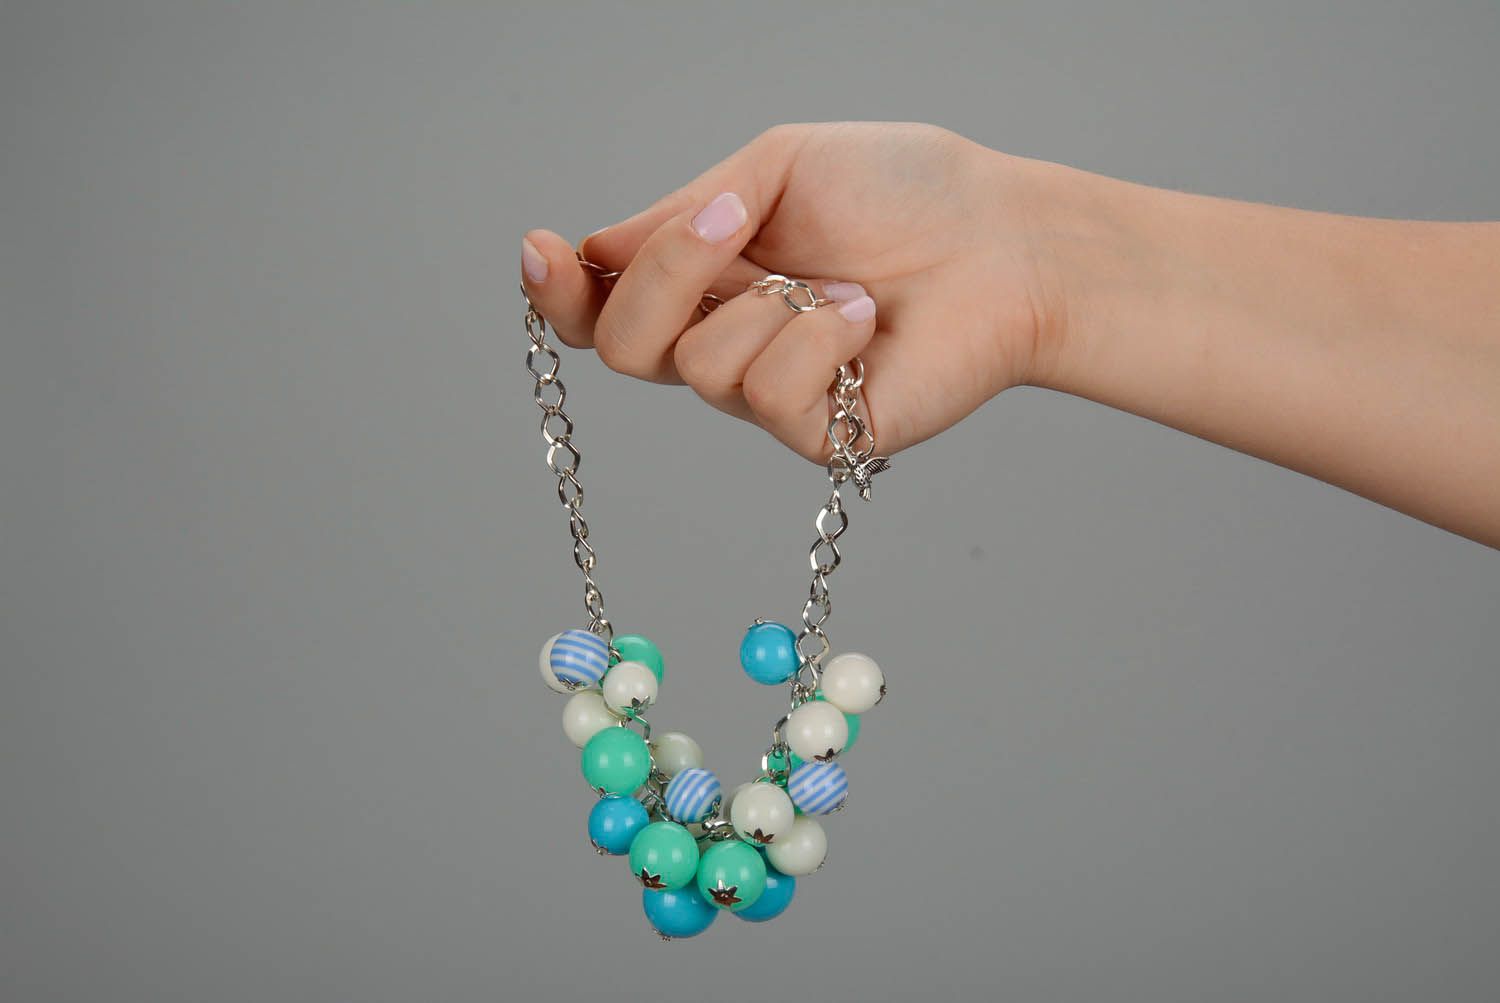 Necklace made of acrylic beads photo 5